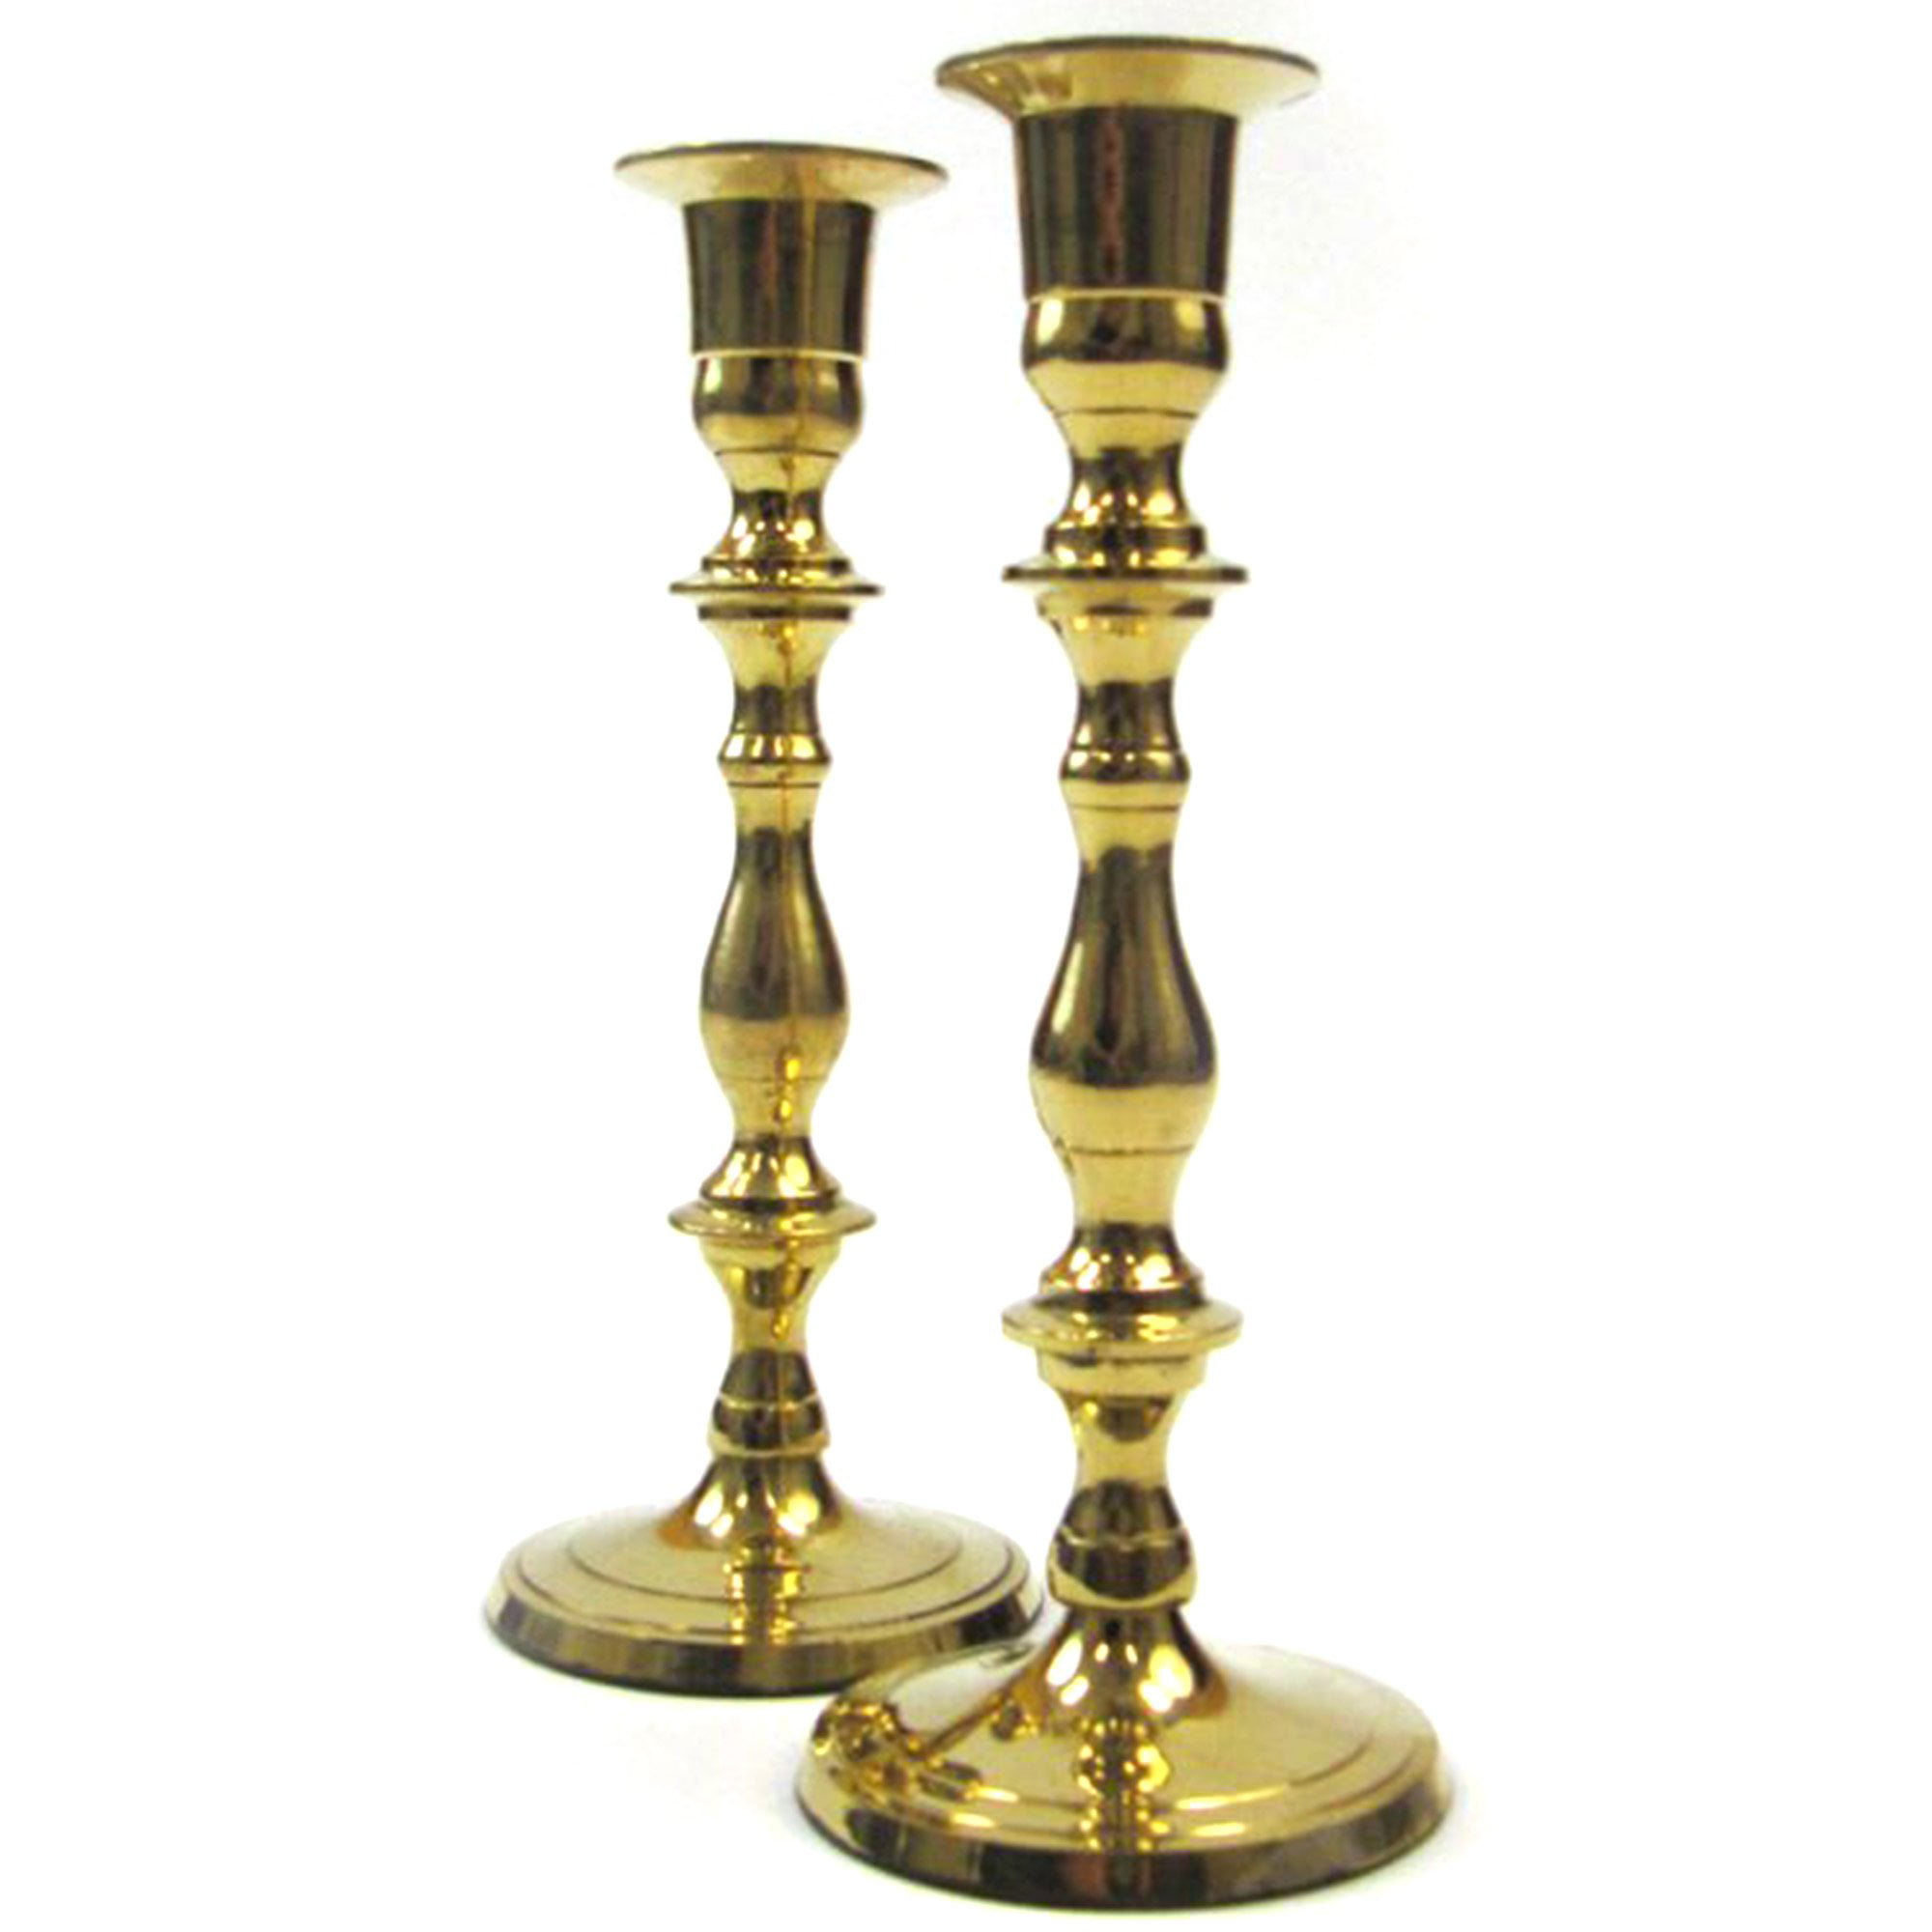 Pair of Solid brass Gatco candleholders 12”